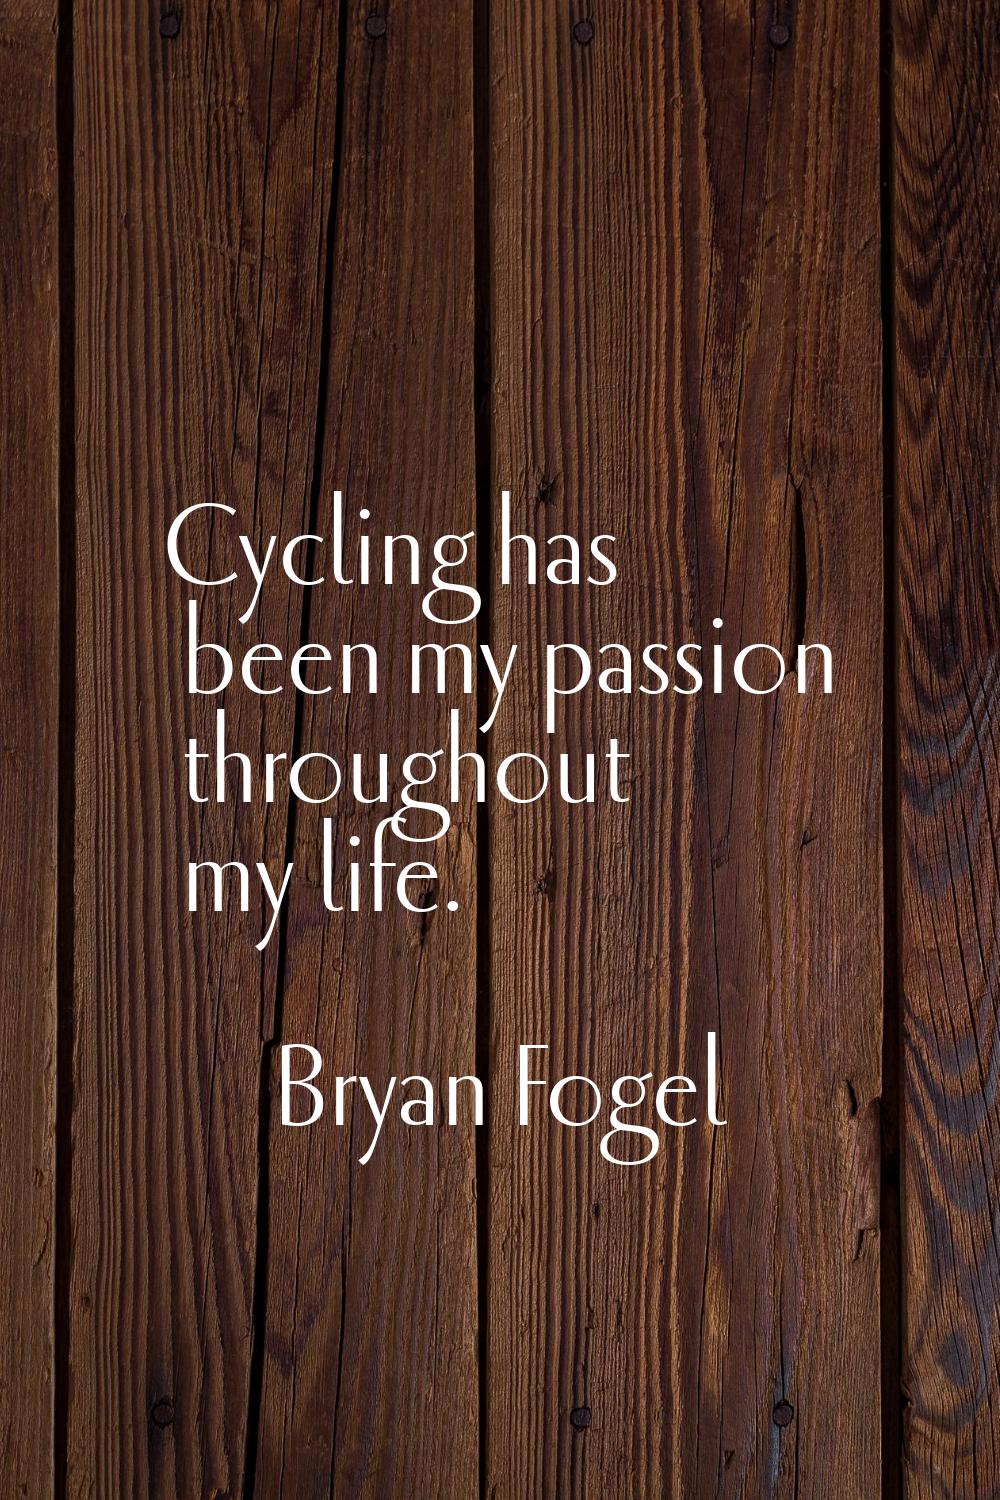 Cycling has been my passion throughout my life.